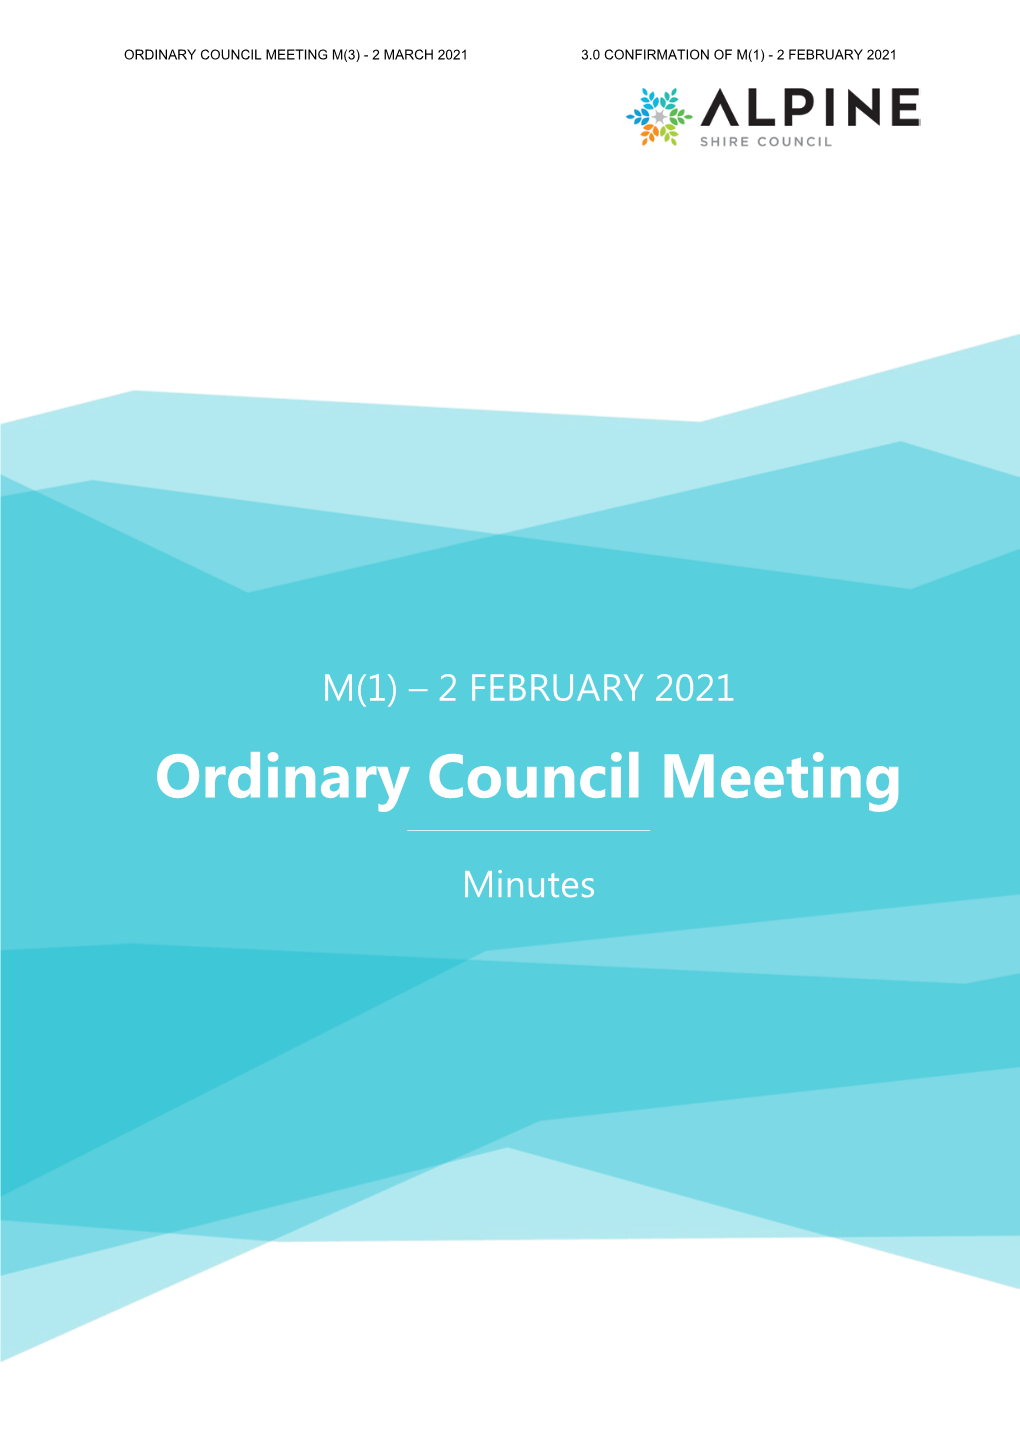 Ordinary Council Meeting M(3) - 2 March 2021 3.0 Confirmation of M(1) - 2 February 2021